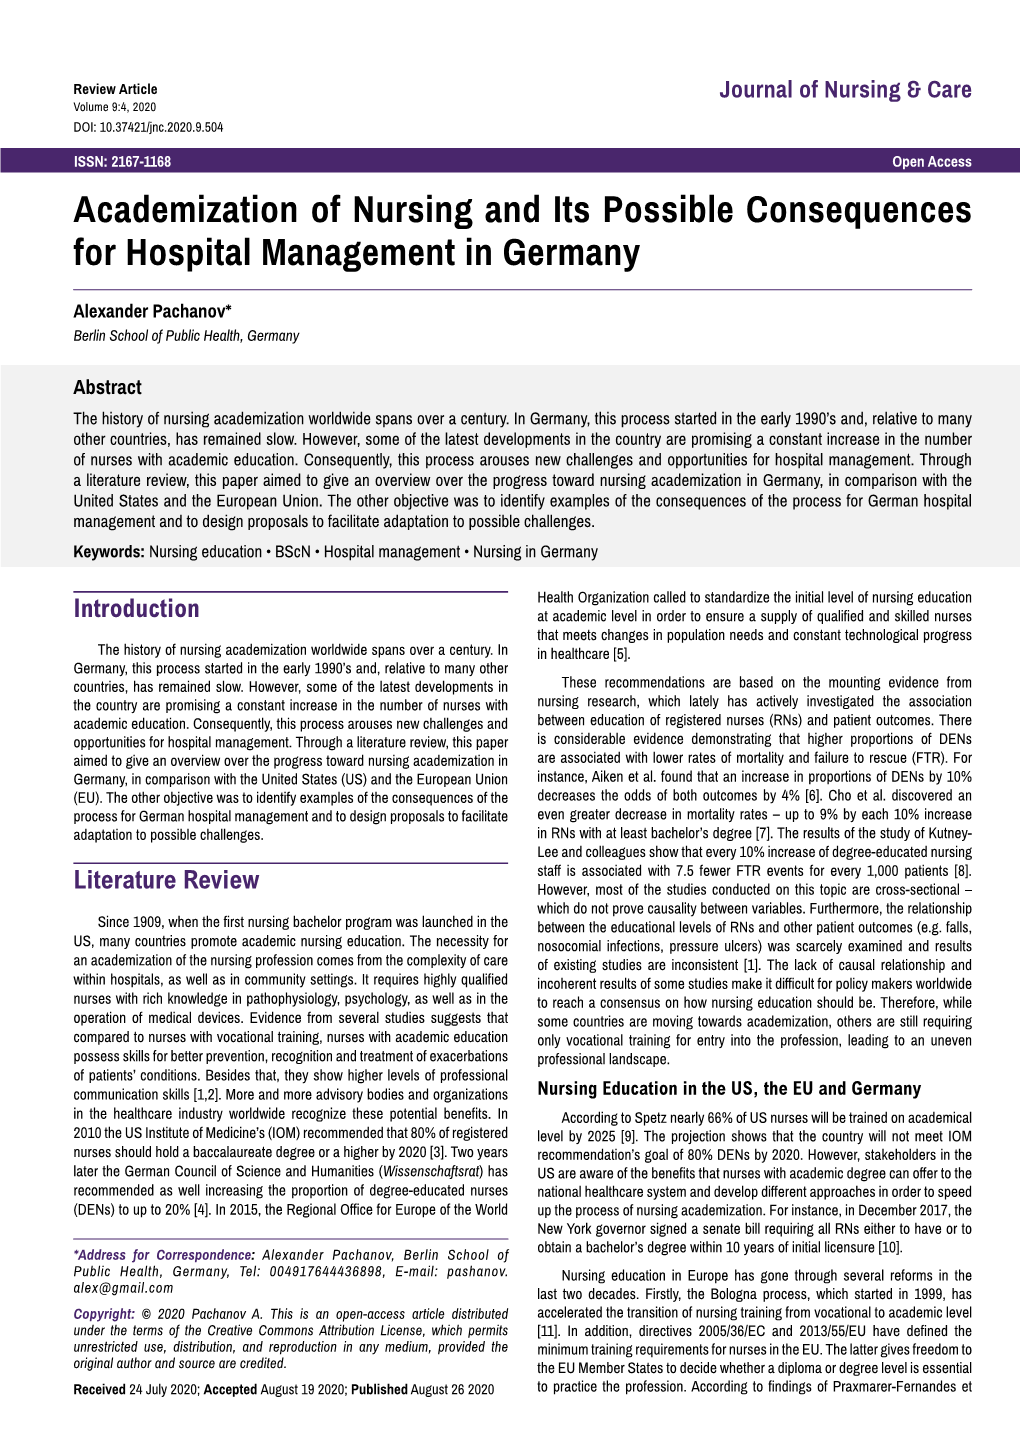 Academization of Nursing and Its Possible Consequences for Hospital Management in Germany